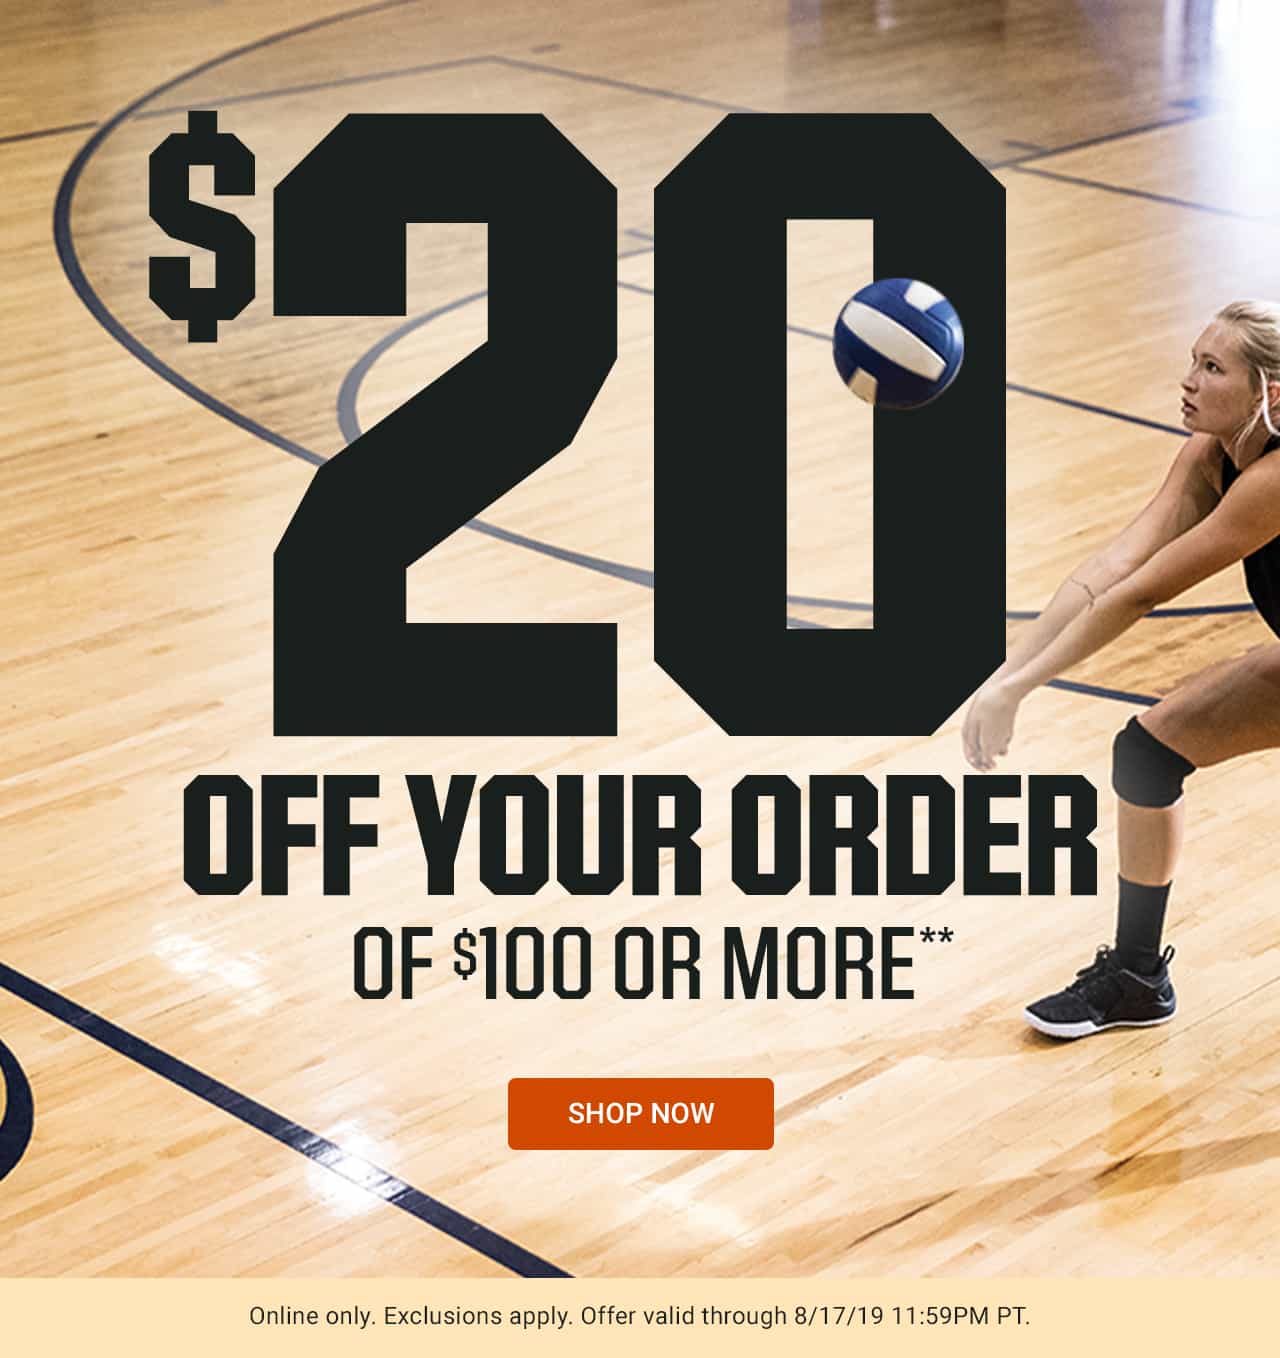 Take $20 off your order of $100 or more.** Online only. Exclusions apply. Offer valid through August 17, 2019 11:59PM PT. Shop now. Missed the offer? You can still shop this week's deals!